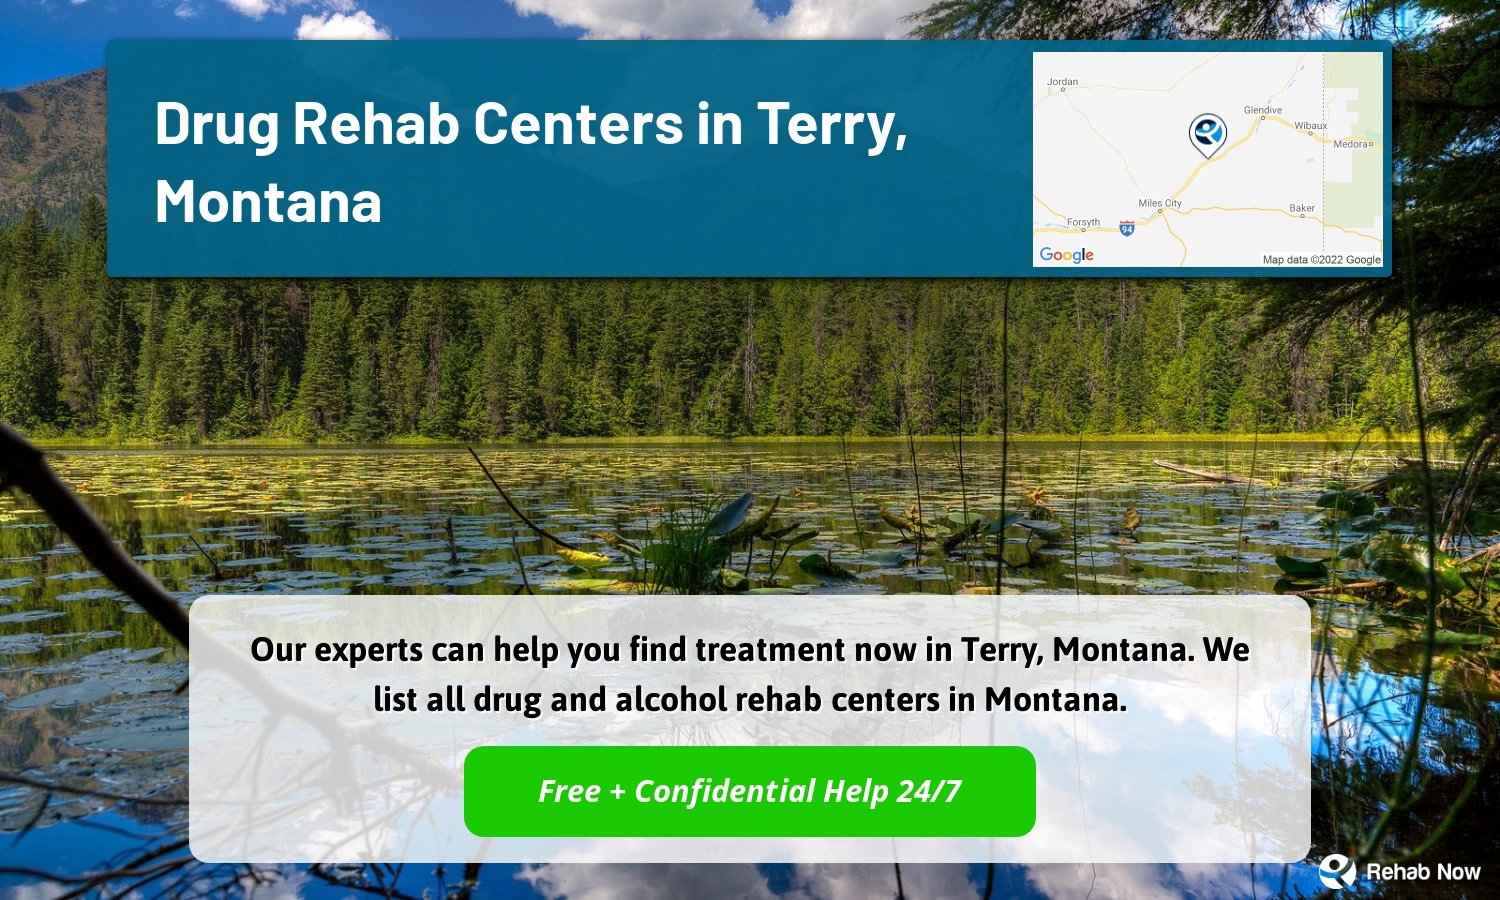 Our experts can help you find treatment now in Terry, Montana. We list all drug and alcohol rehab centers in Montana.